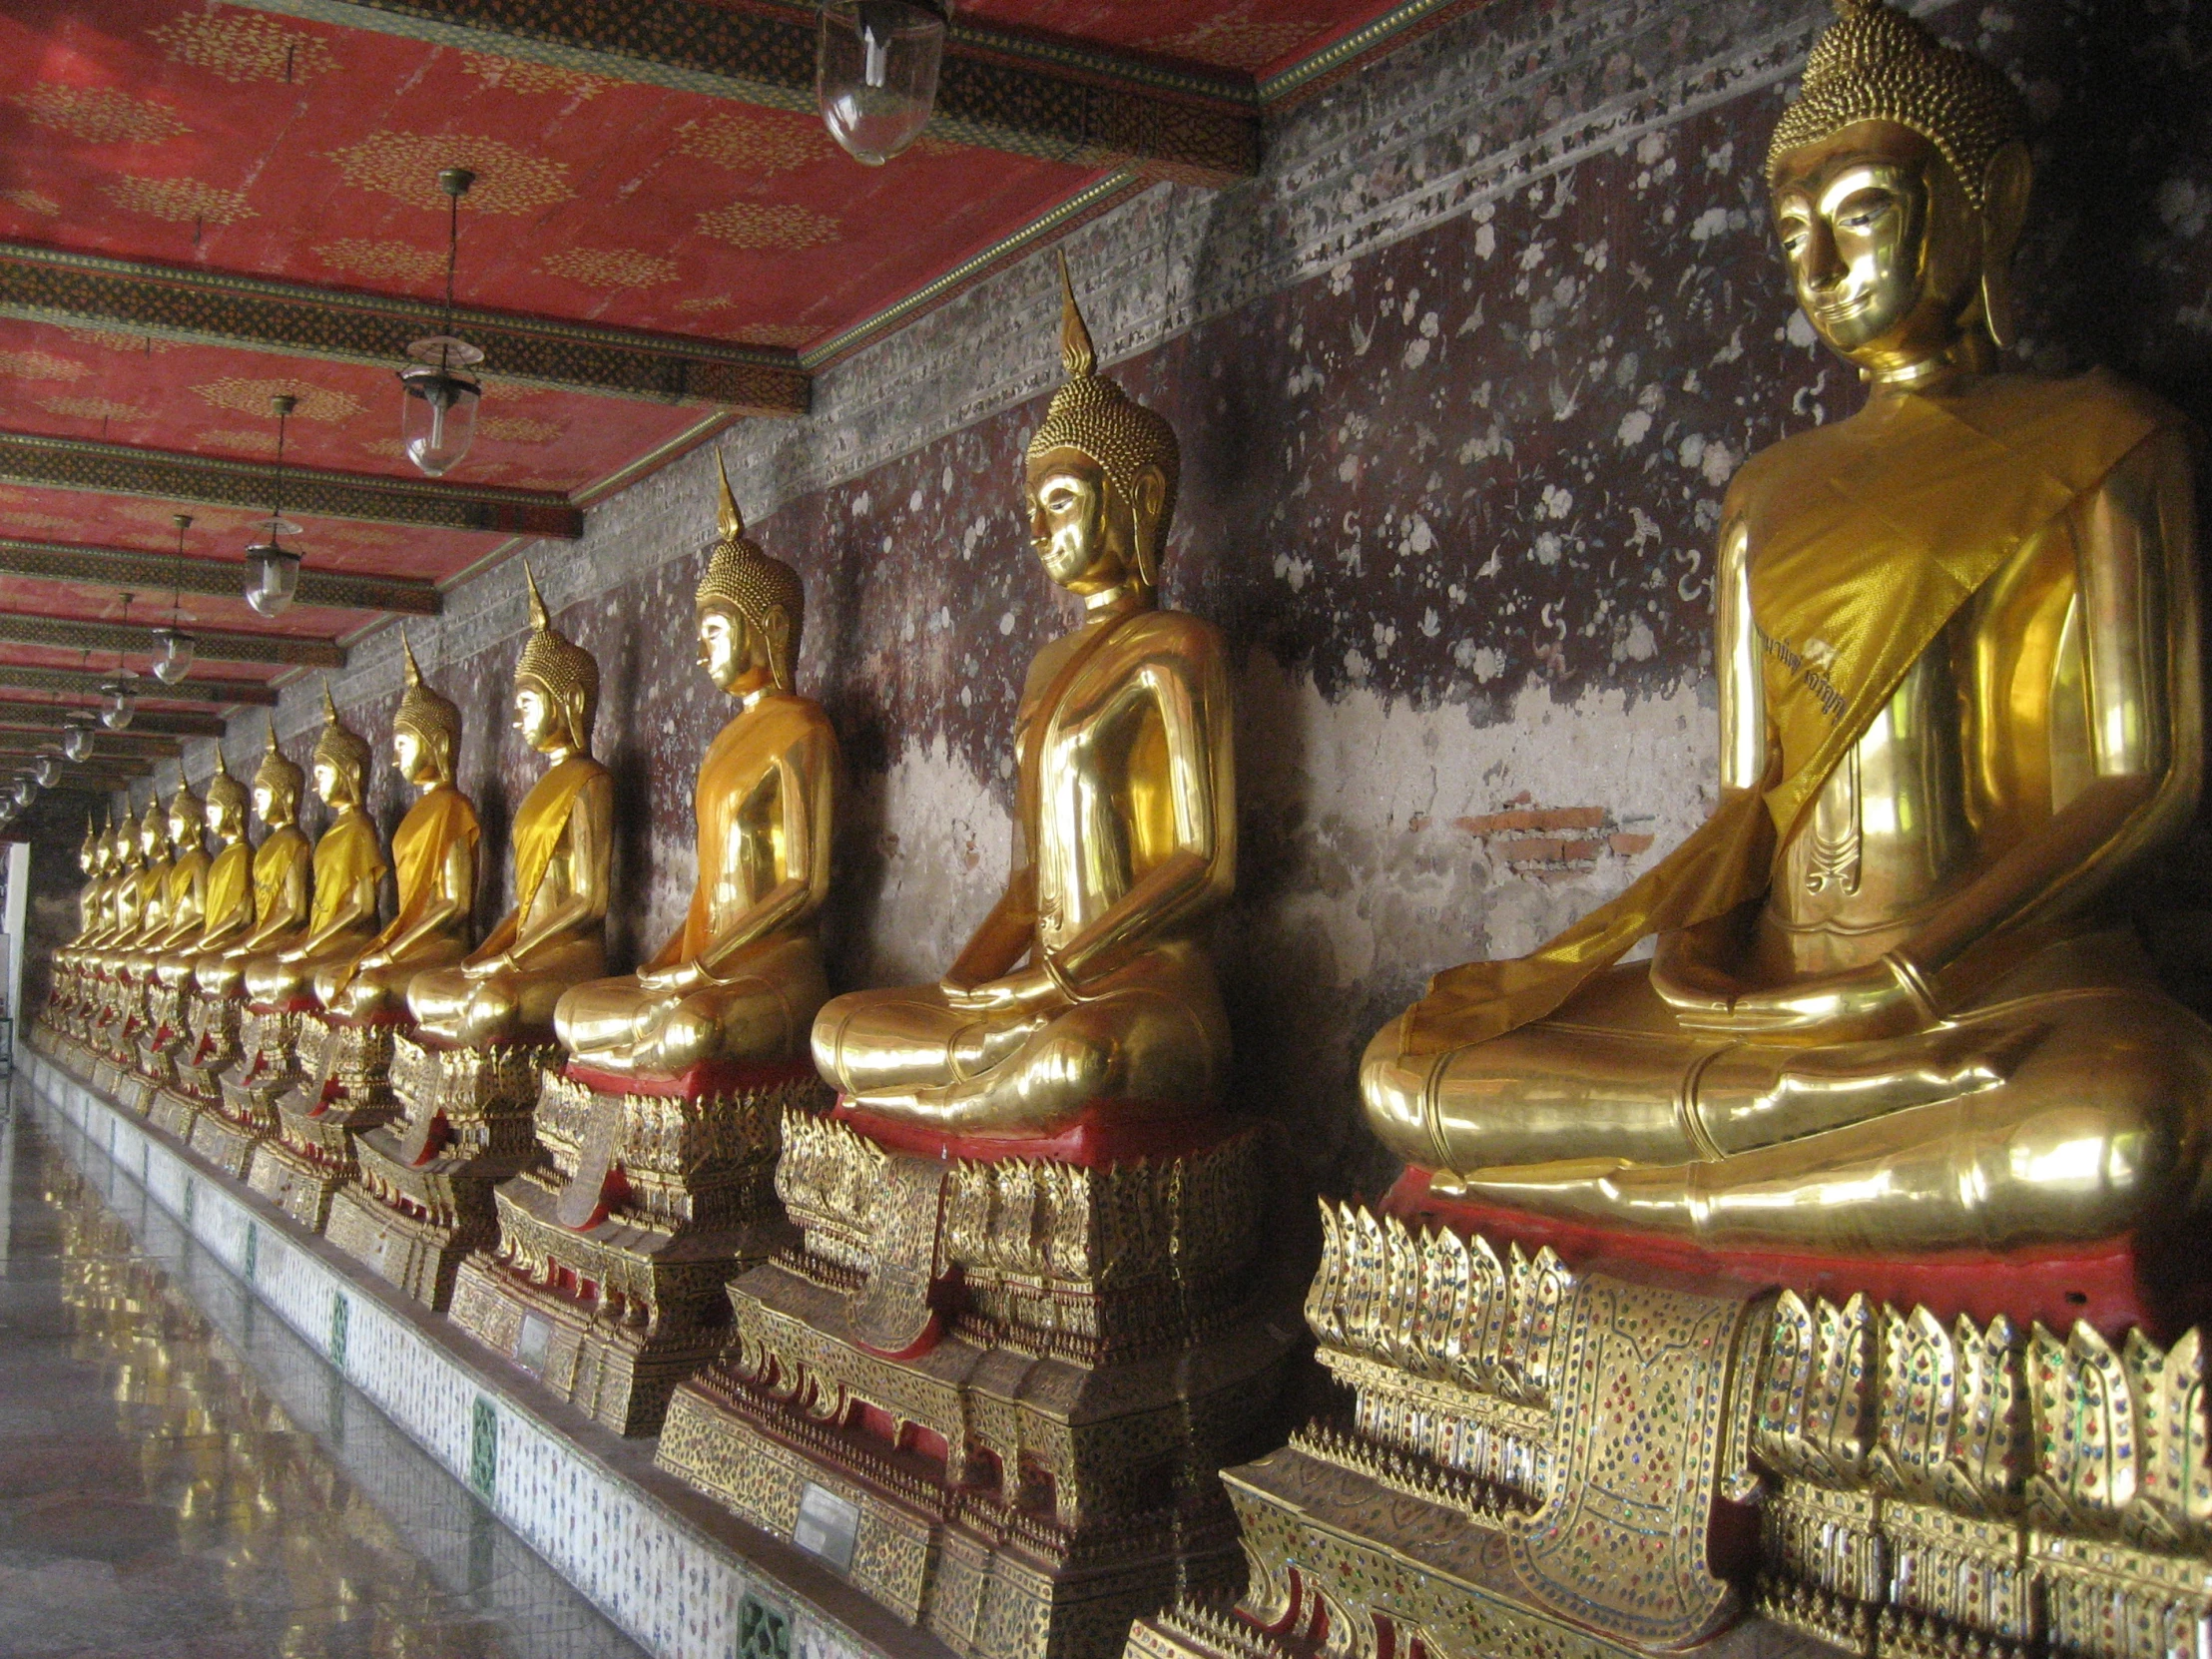 gold statues of buddhas line the walls in a temple